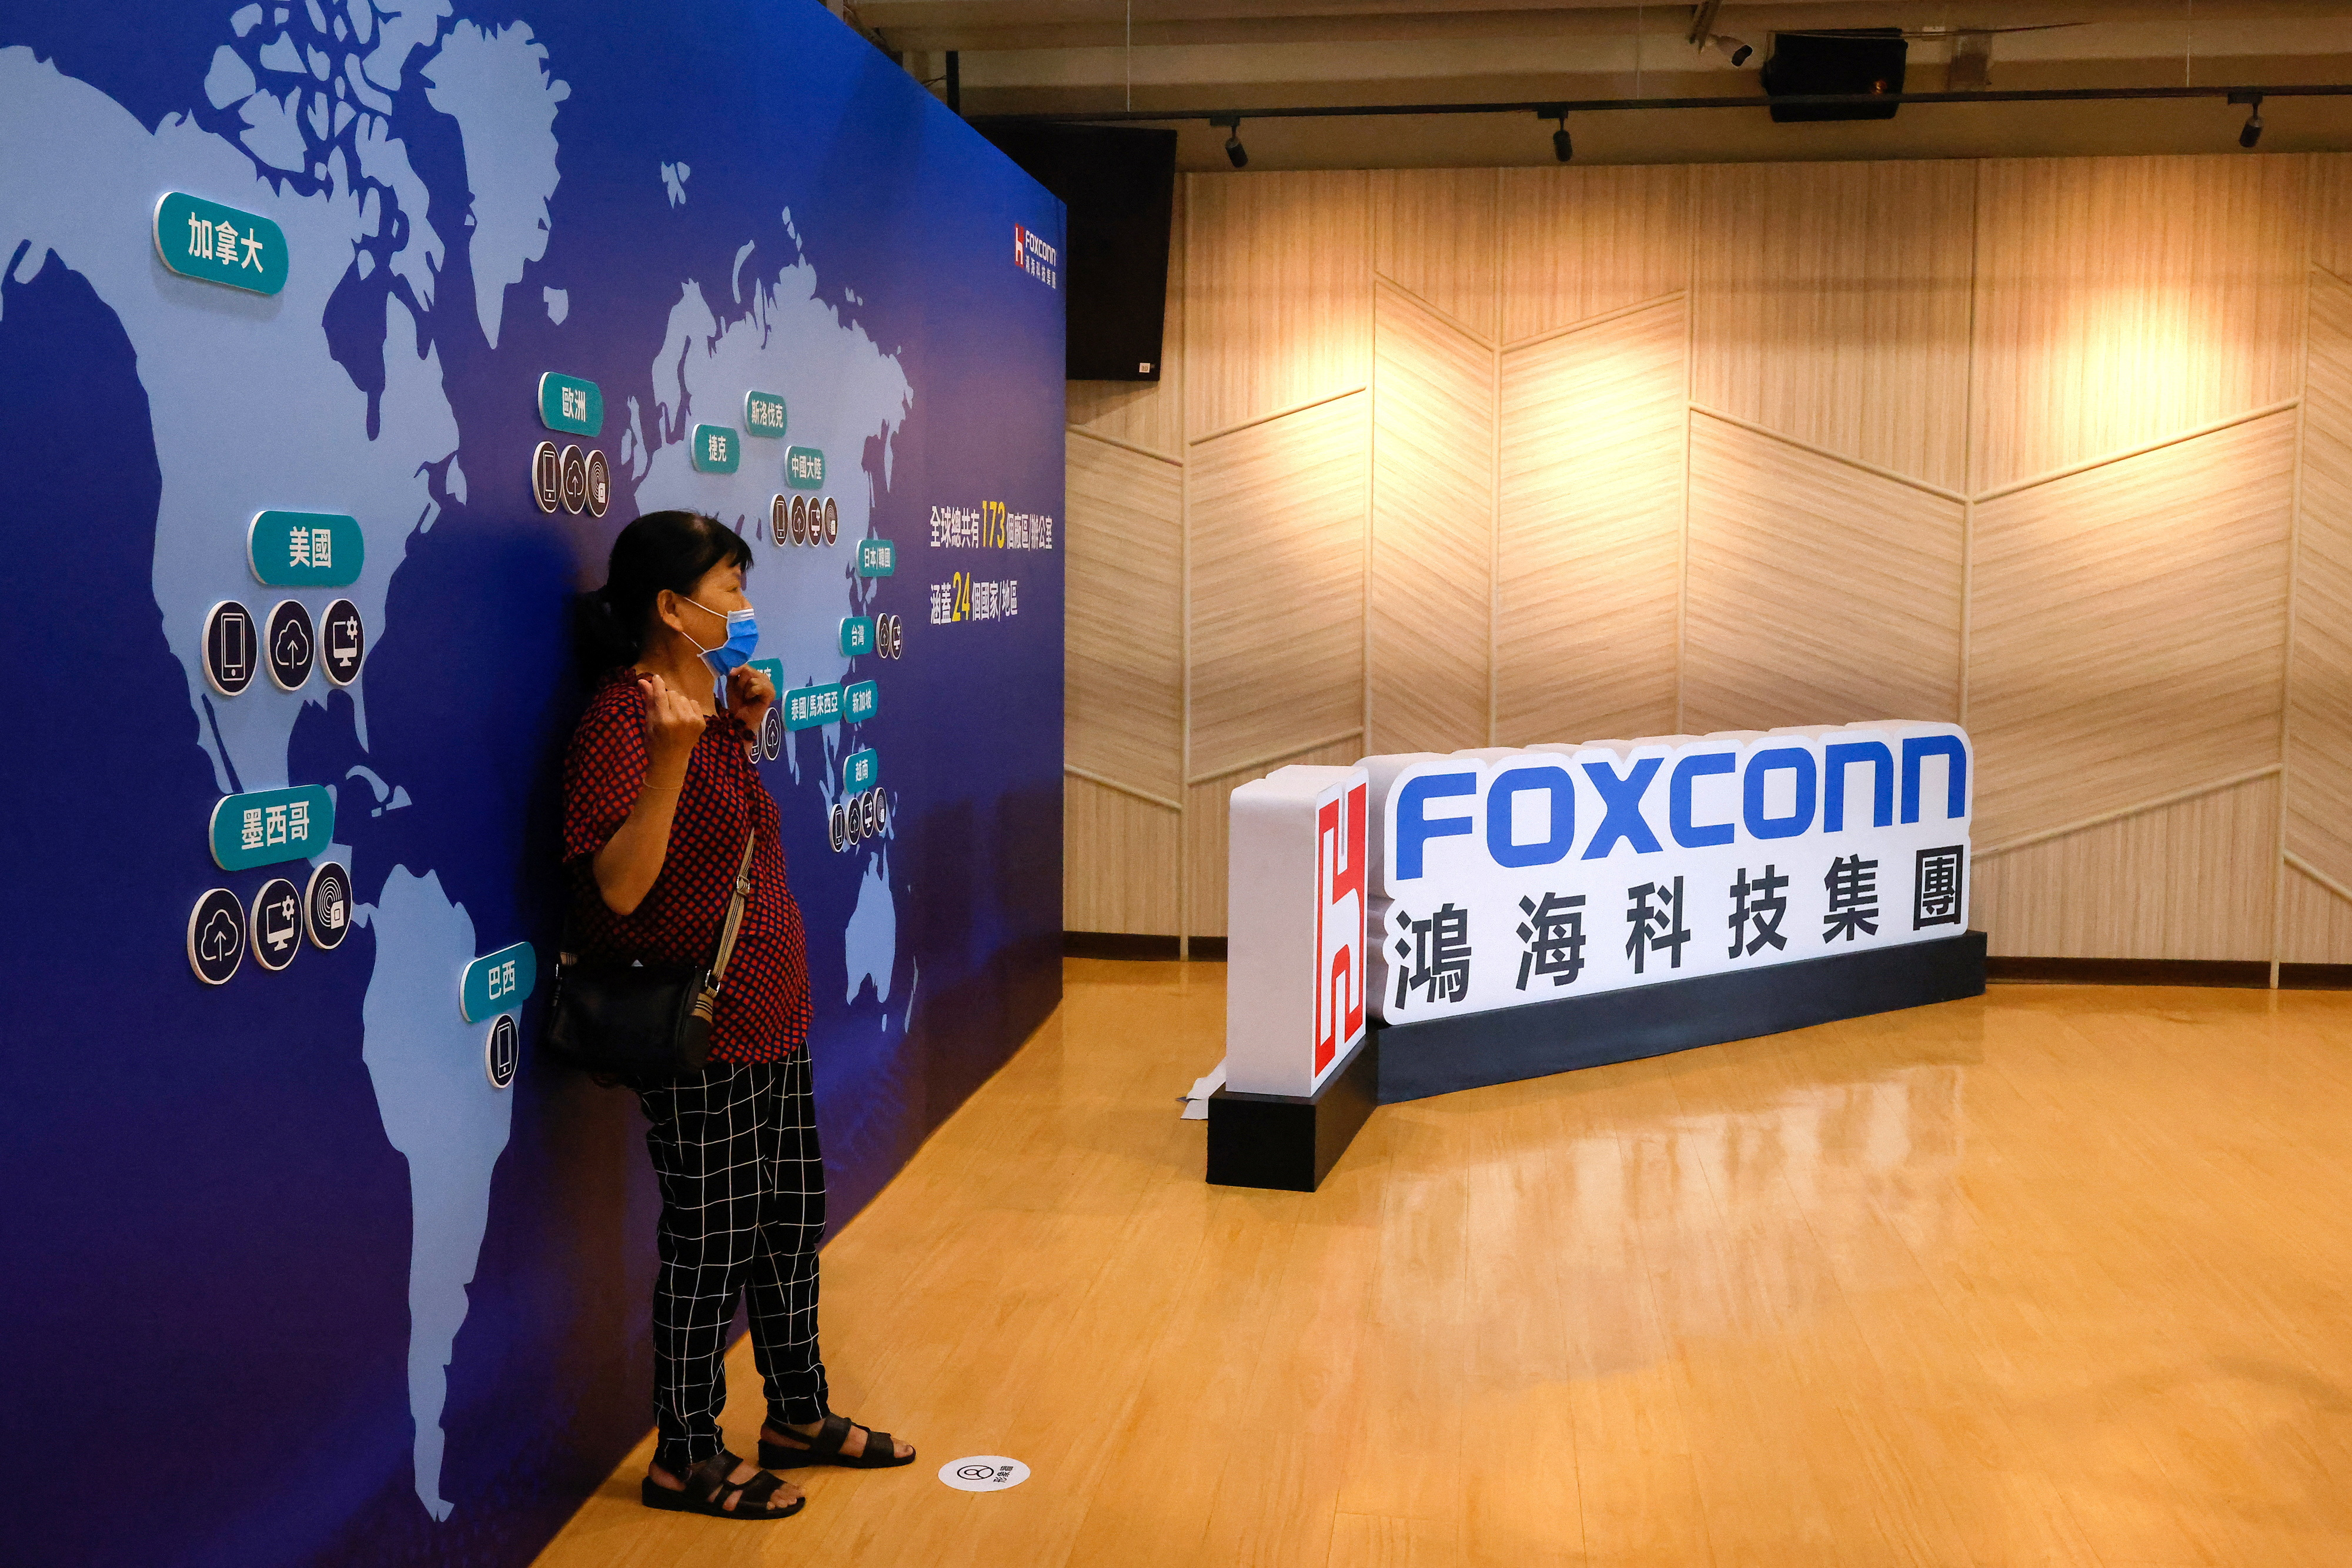 A Foxconn shareholder poses for photos after the annual shareholder meeting in New Taipei City